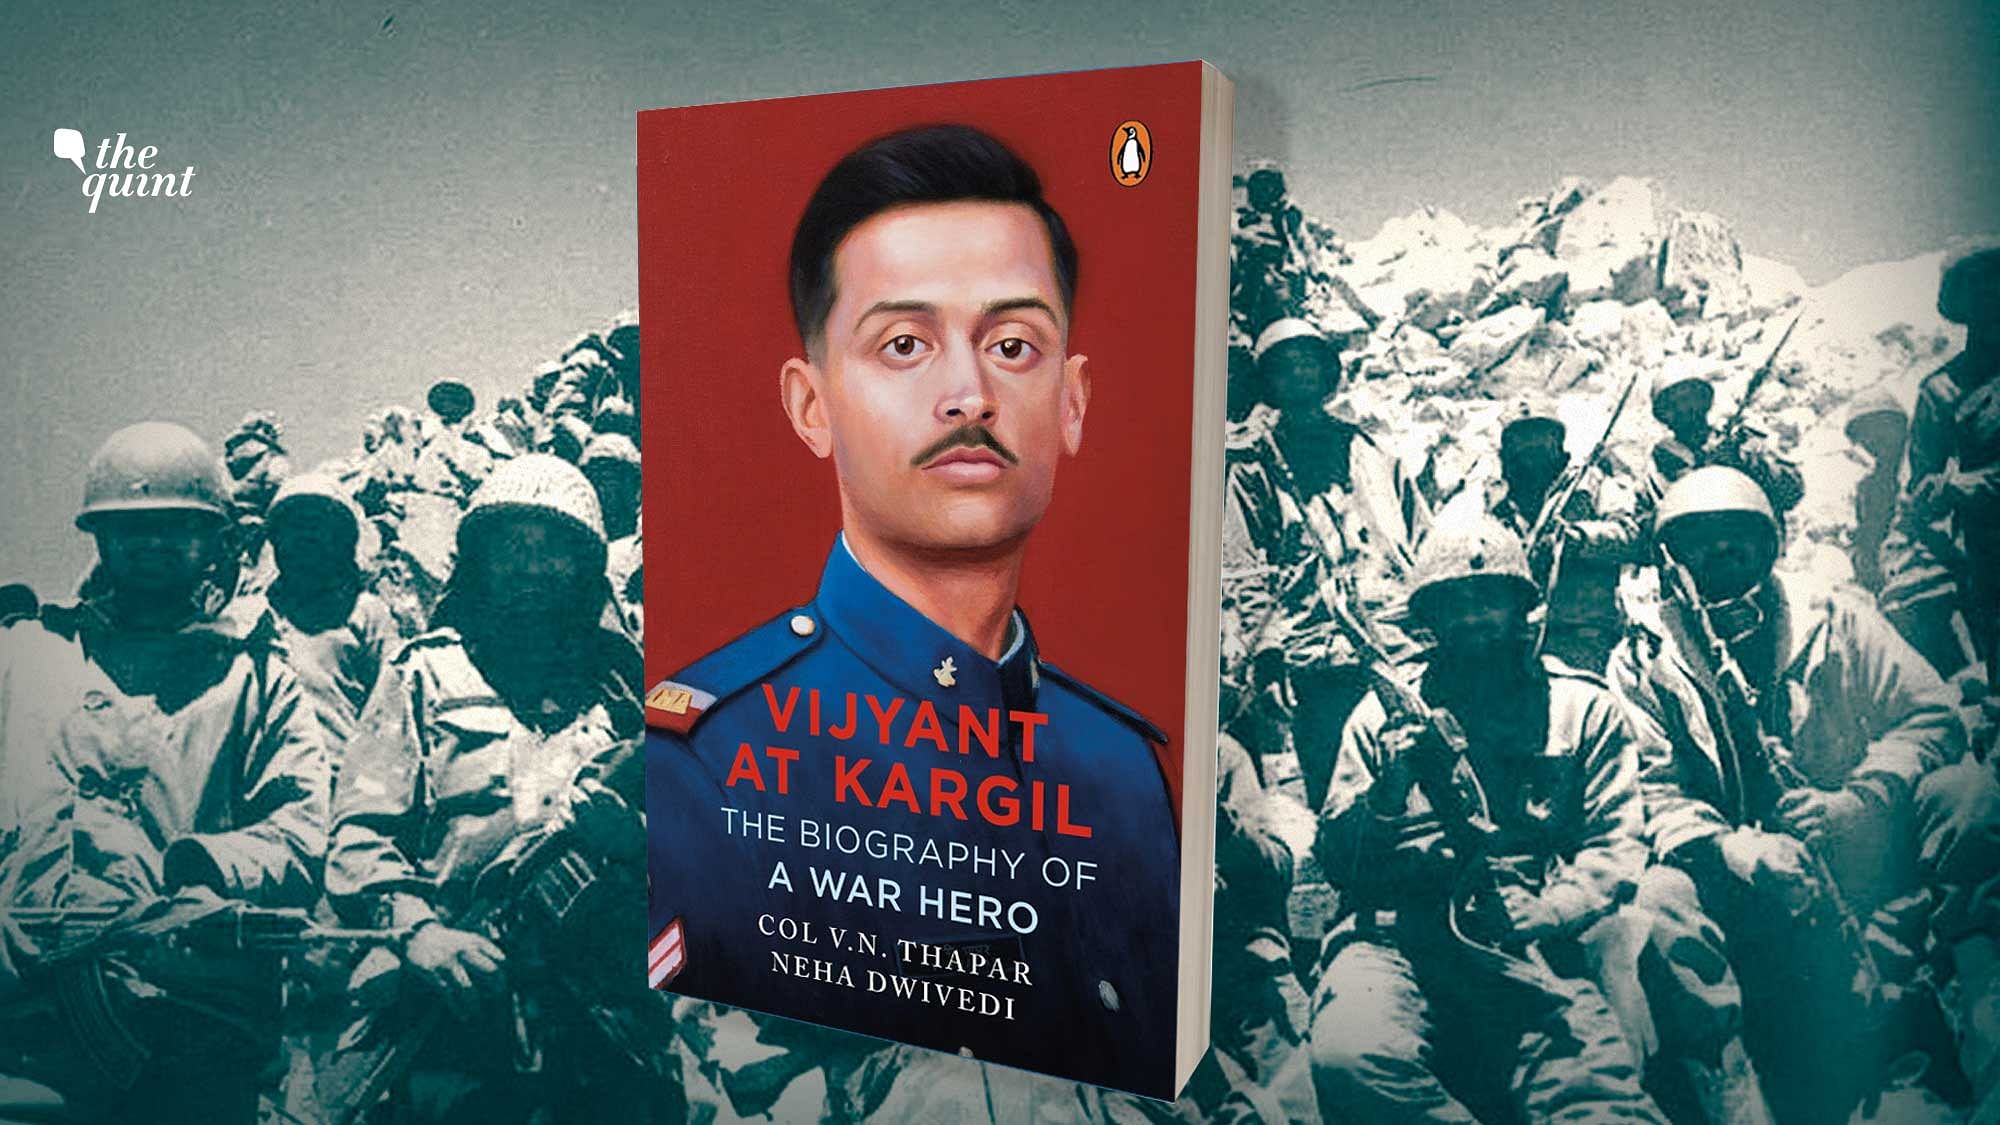 Image of the book cover against a Kargil war picture used for representational purposes.